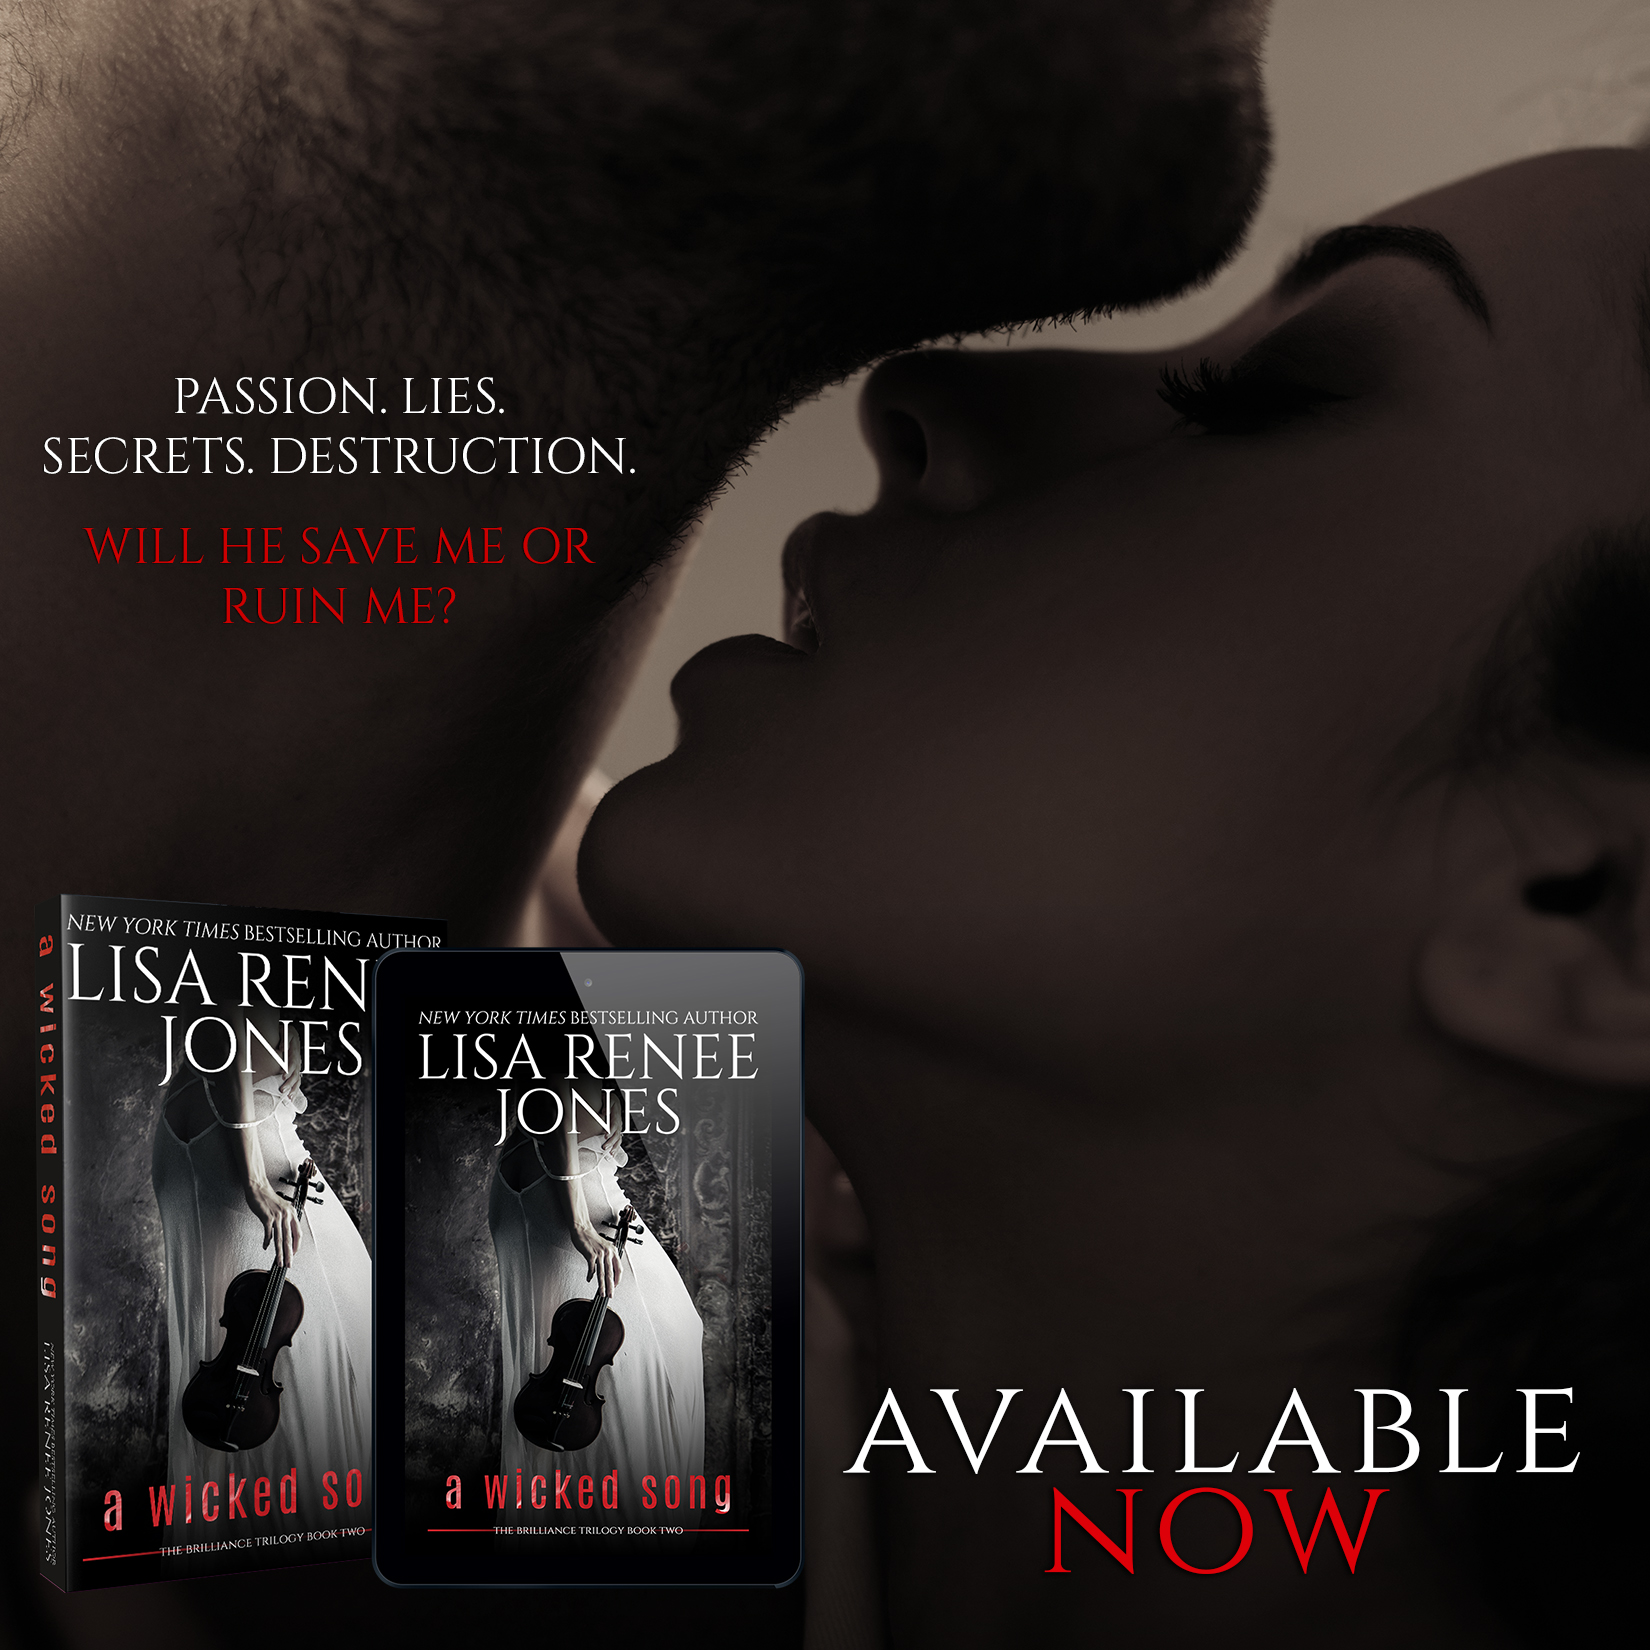 A Wicked Song by #LisaReneeJones [Release Blitz/Review]